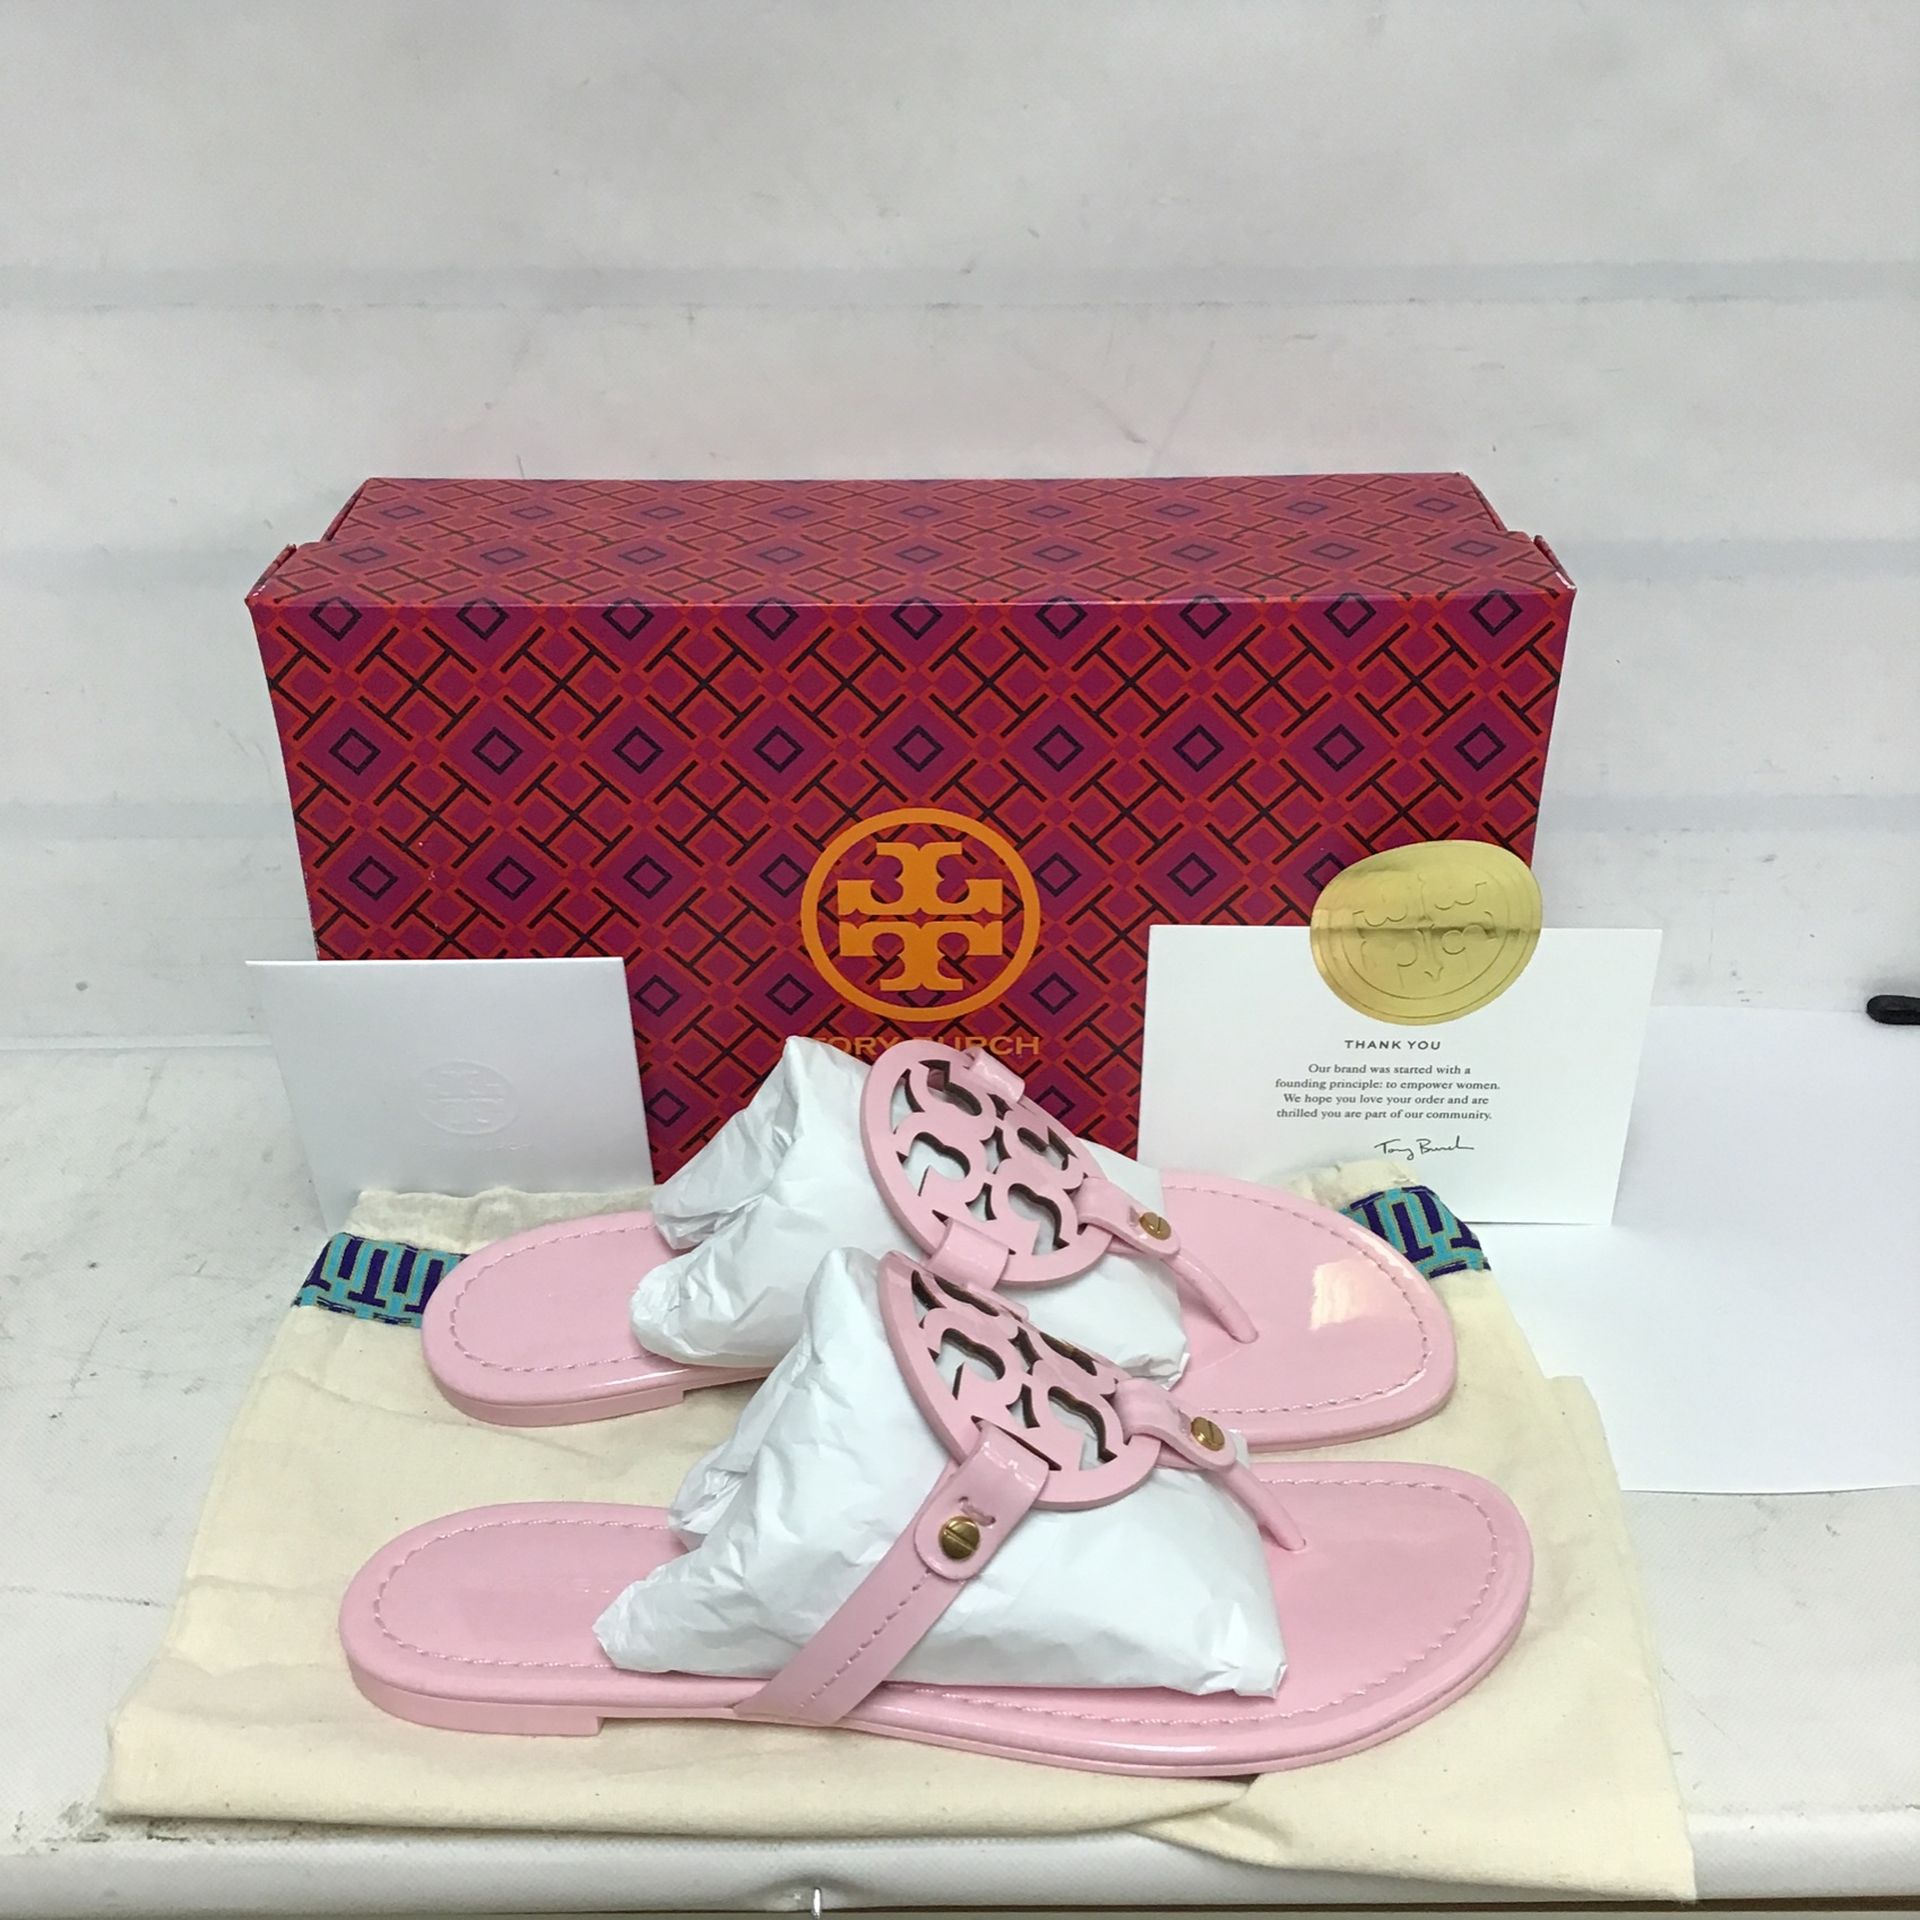 Leather sandals Tory Burch Pink size 7 US in Leather - 25499137